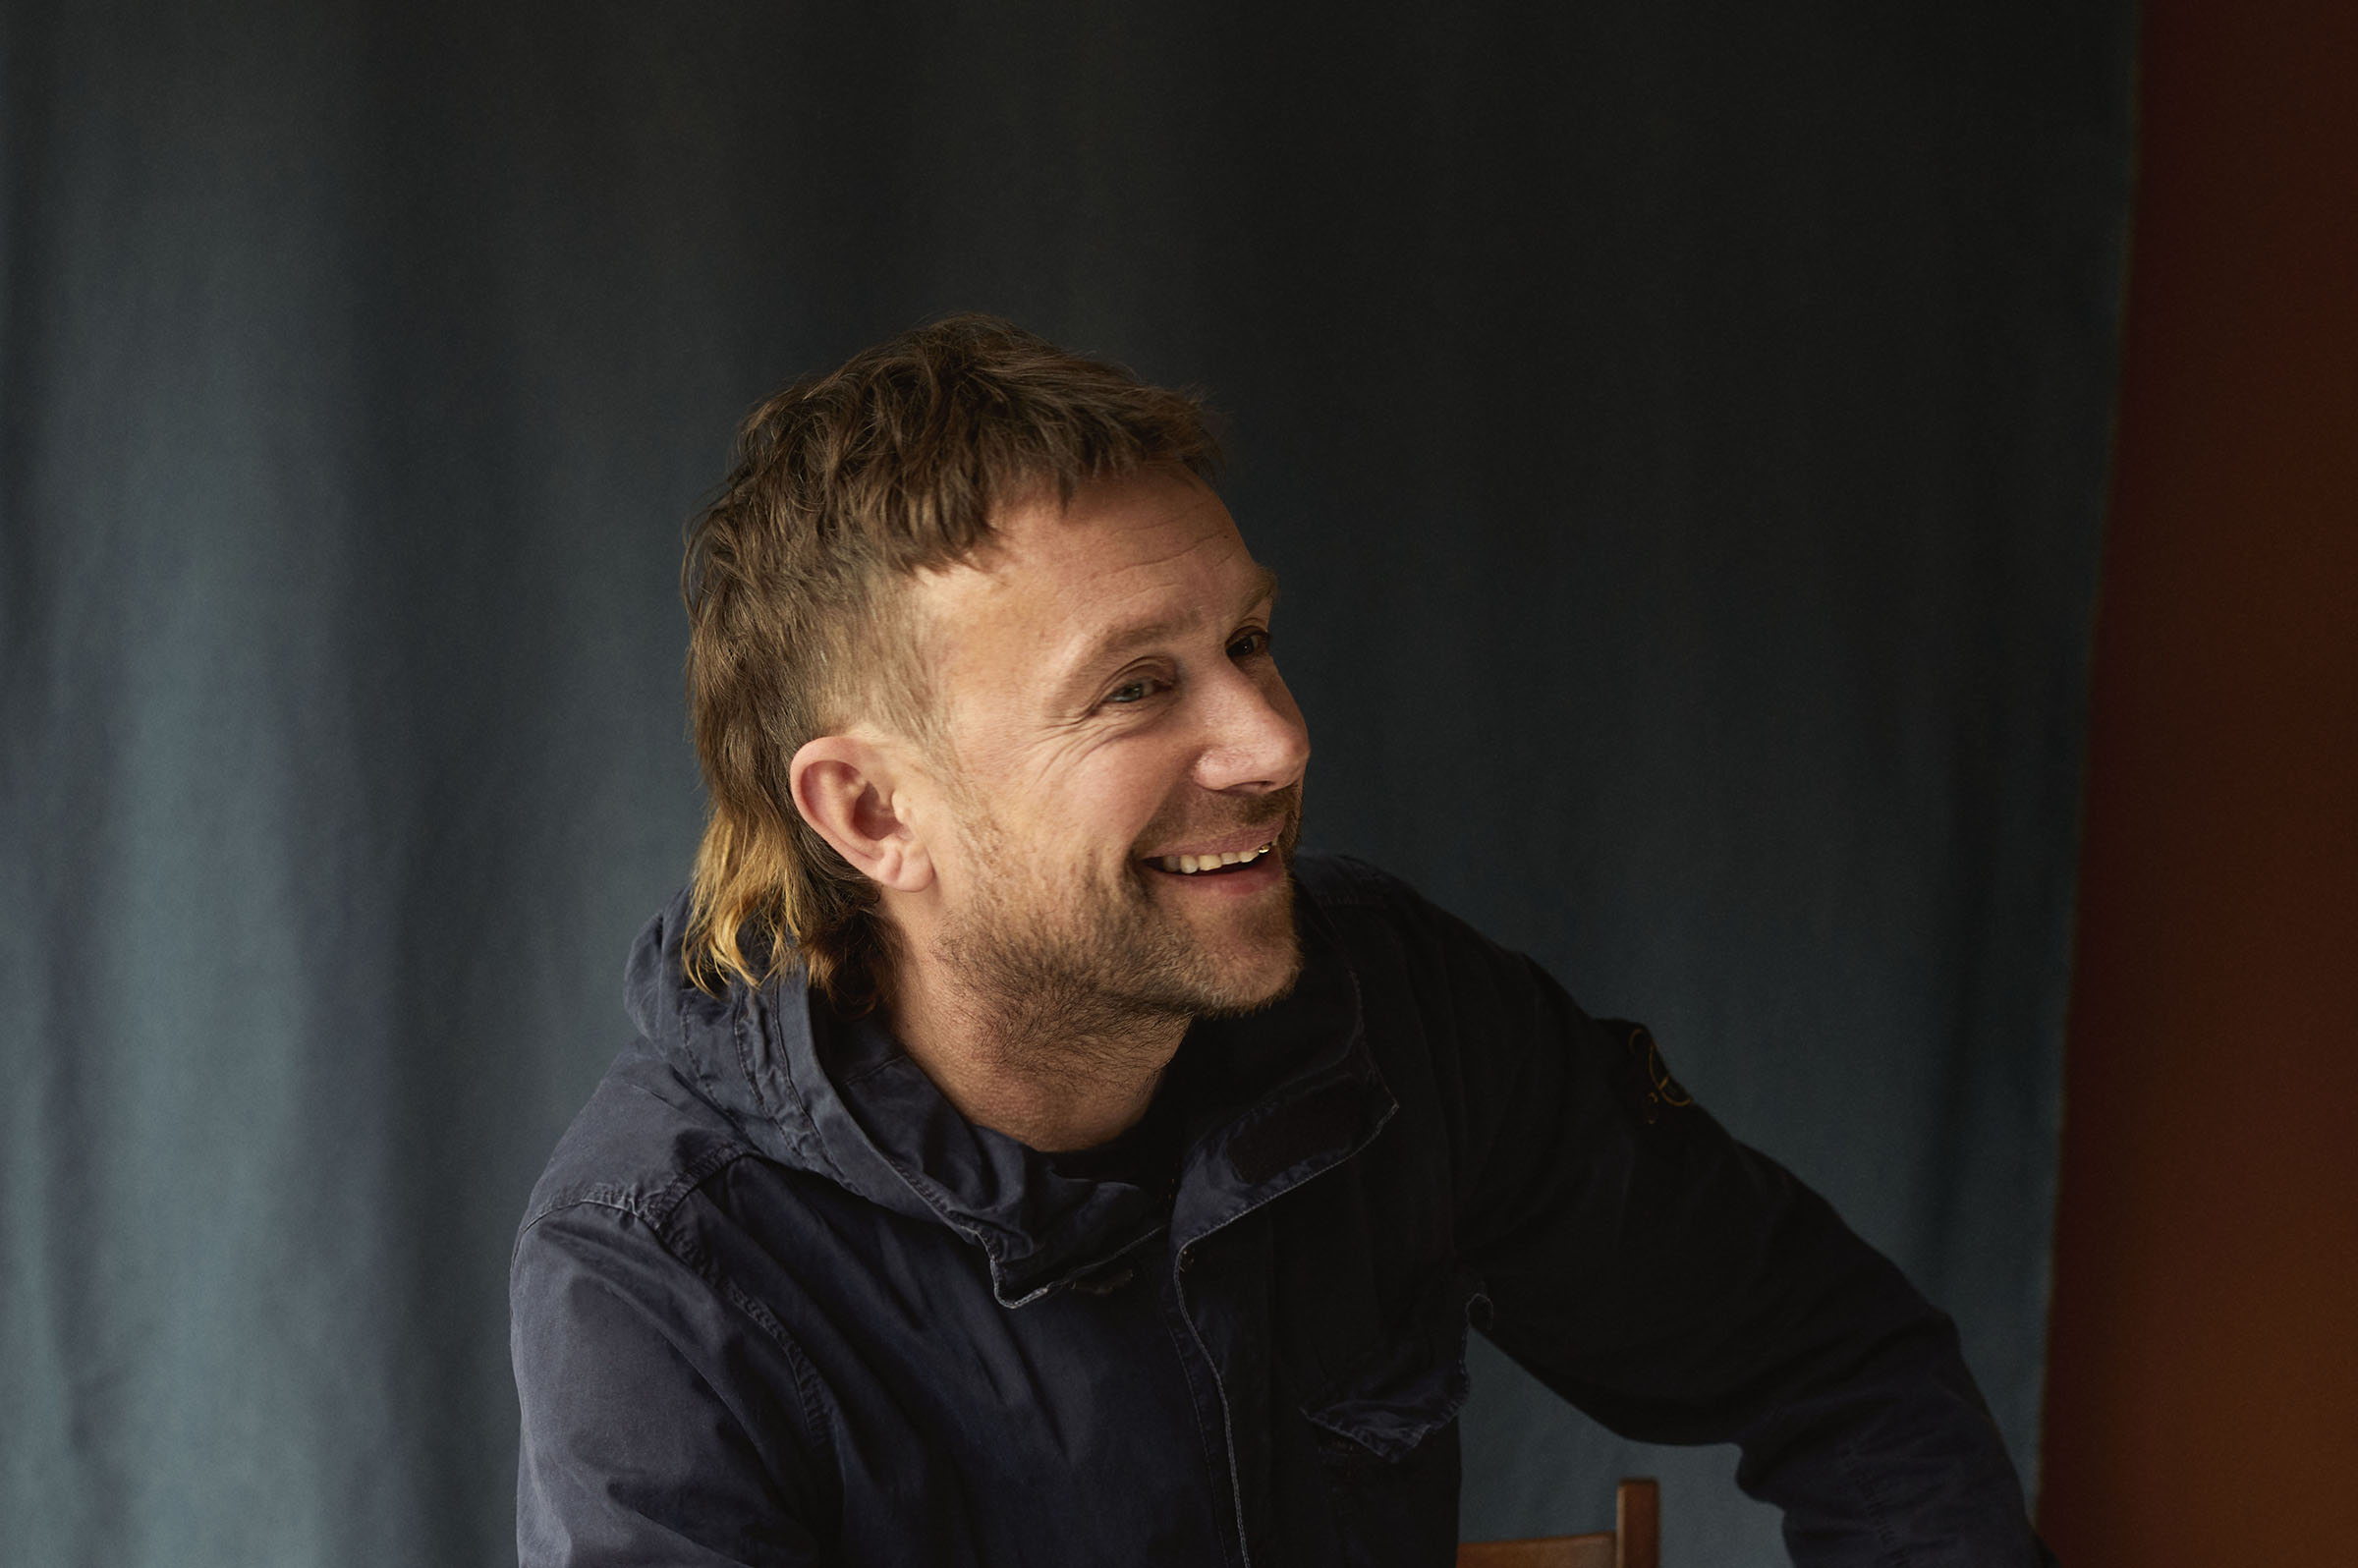 DAMON ALBARN shares new track 'Polaris' from forthcoming album 'The Nearer The Fountain, More Pure The Stream Flows' 